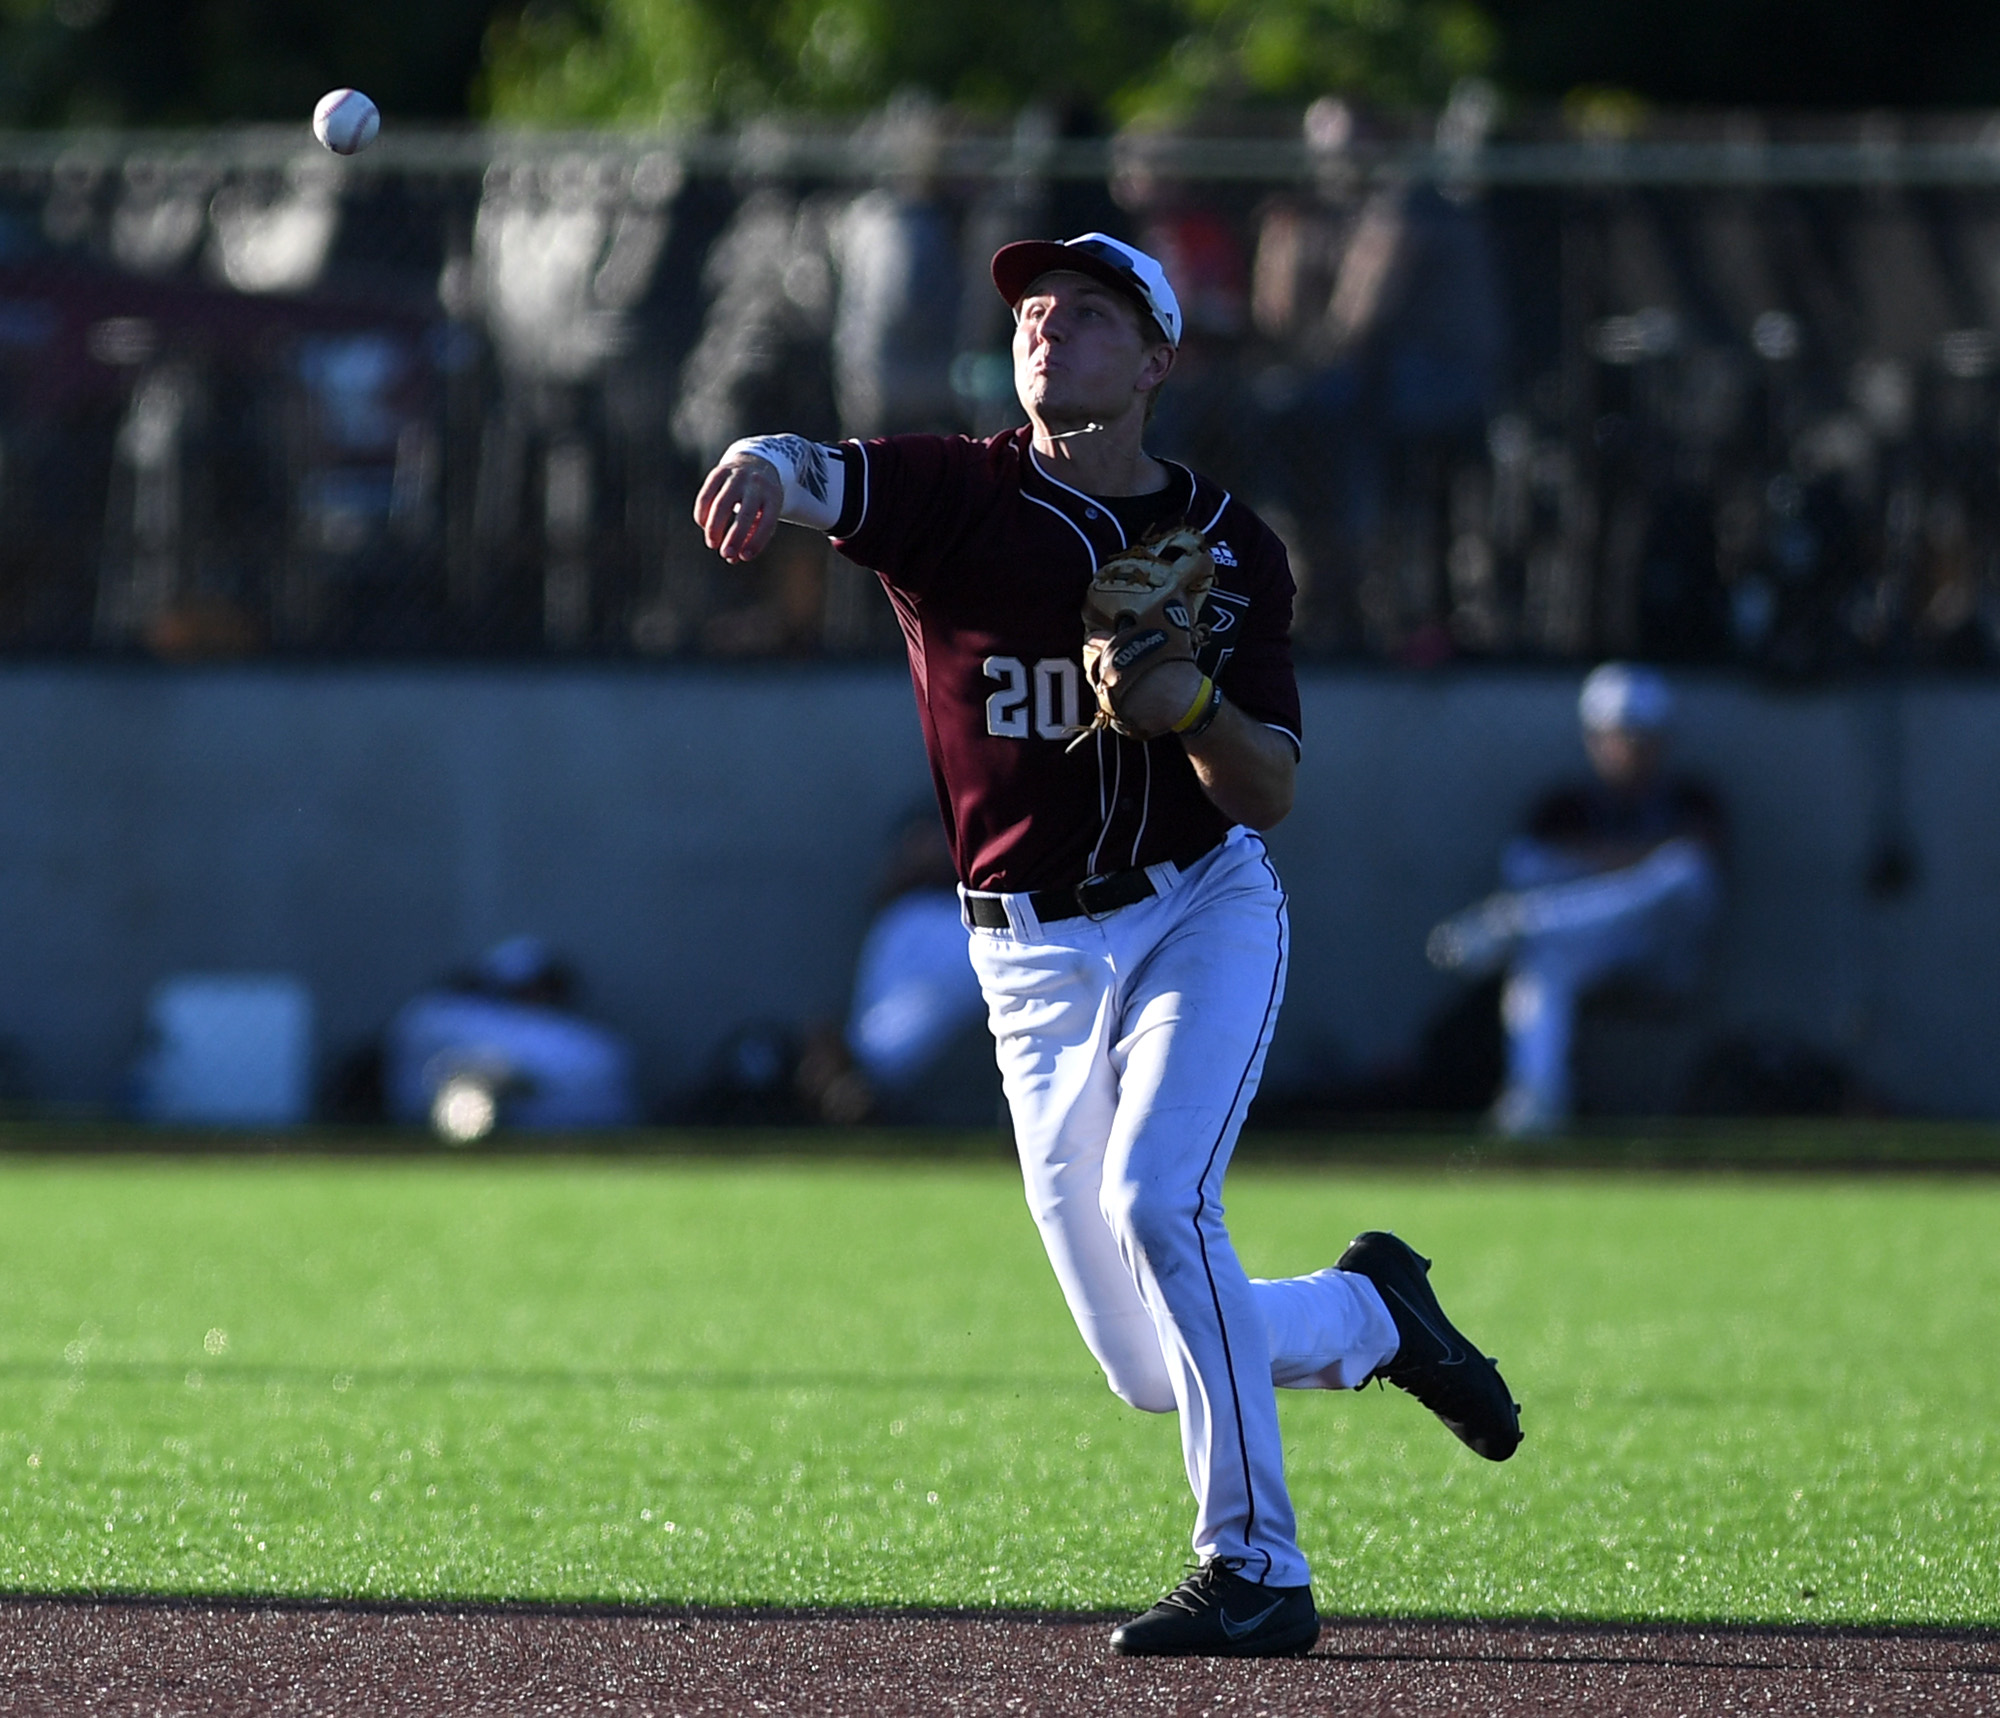 Raptors shortstop Mikey Kane throws the ball Tuesday, June 28, 2022, during a game between the Ridgefield Raptors and the Portland Pickles at the Ridgefield Outdoor Recreation Complex.